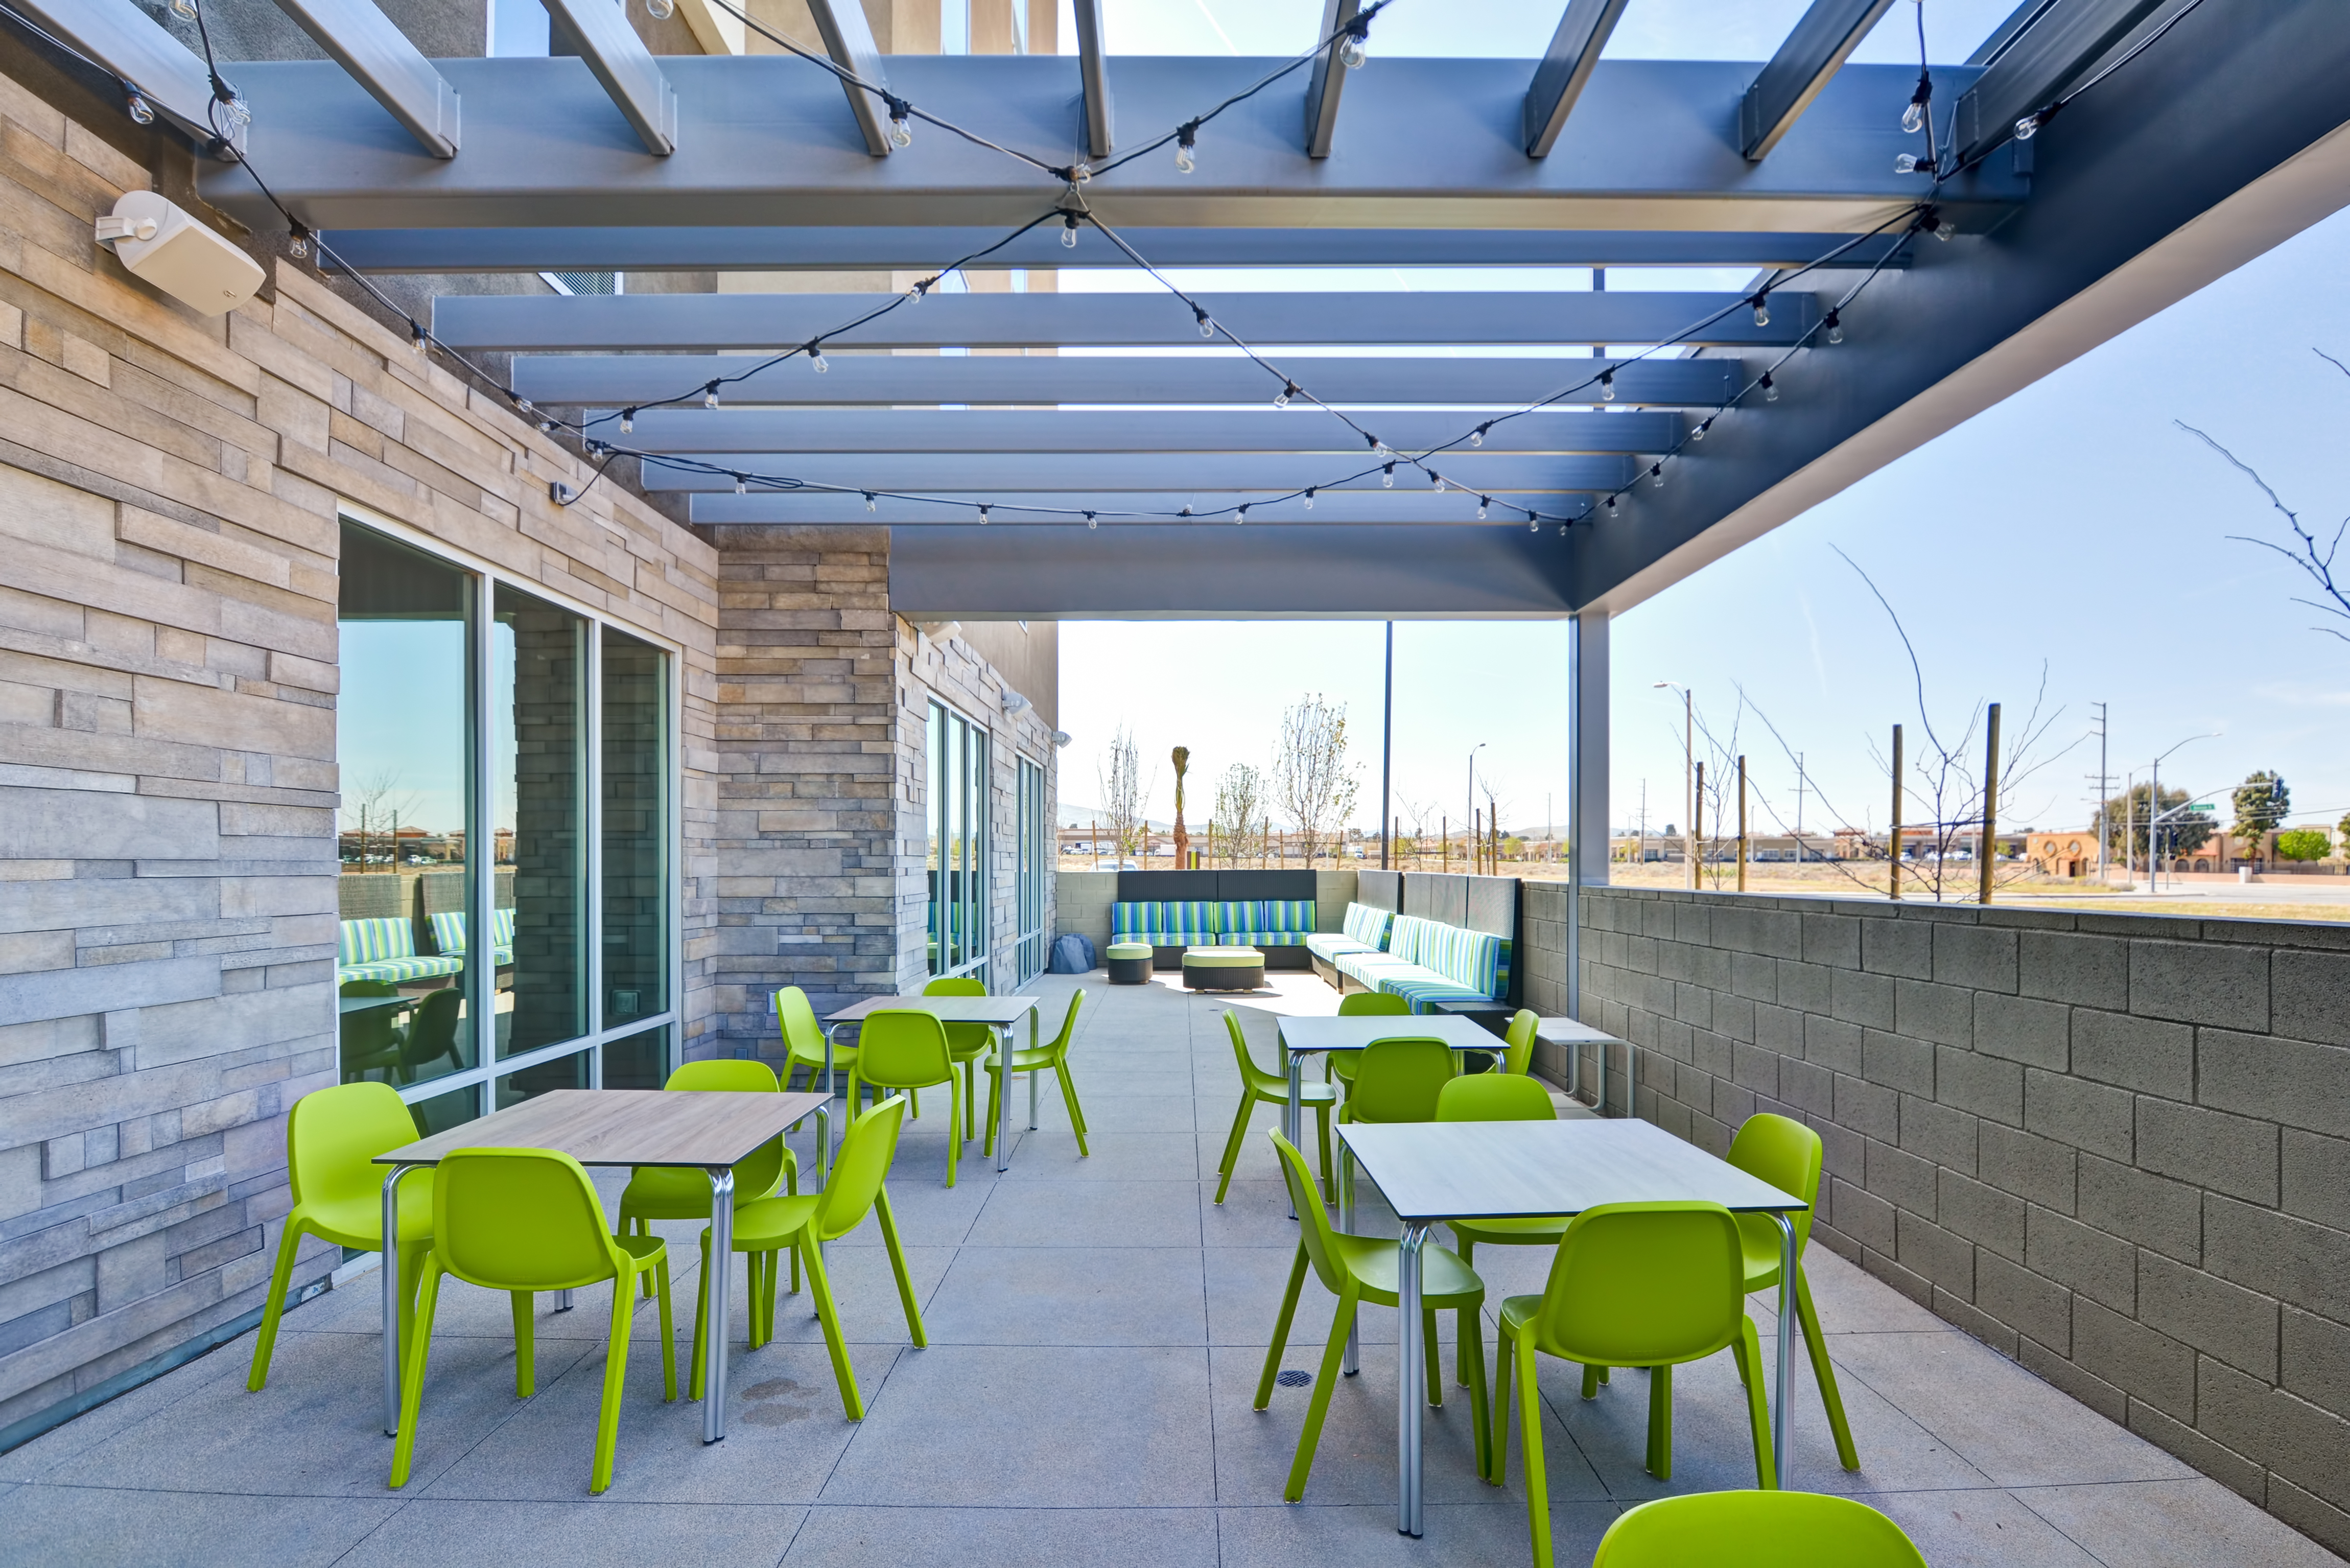 Outdoor Patio with Seating